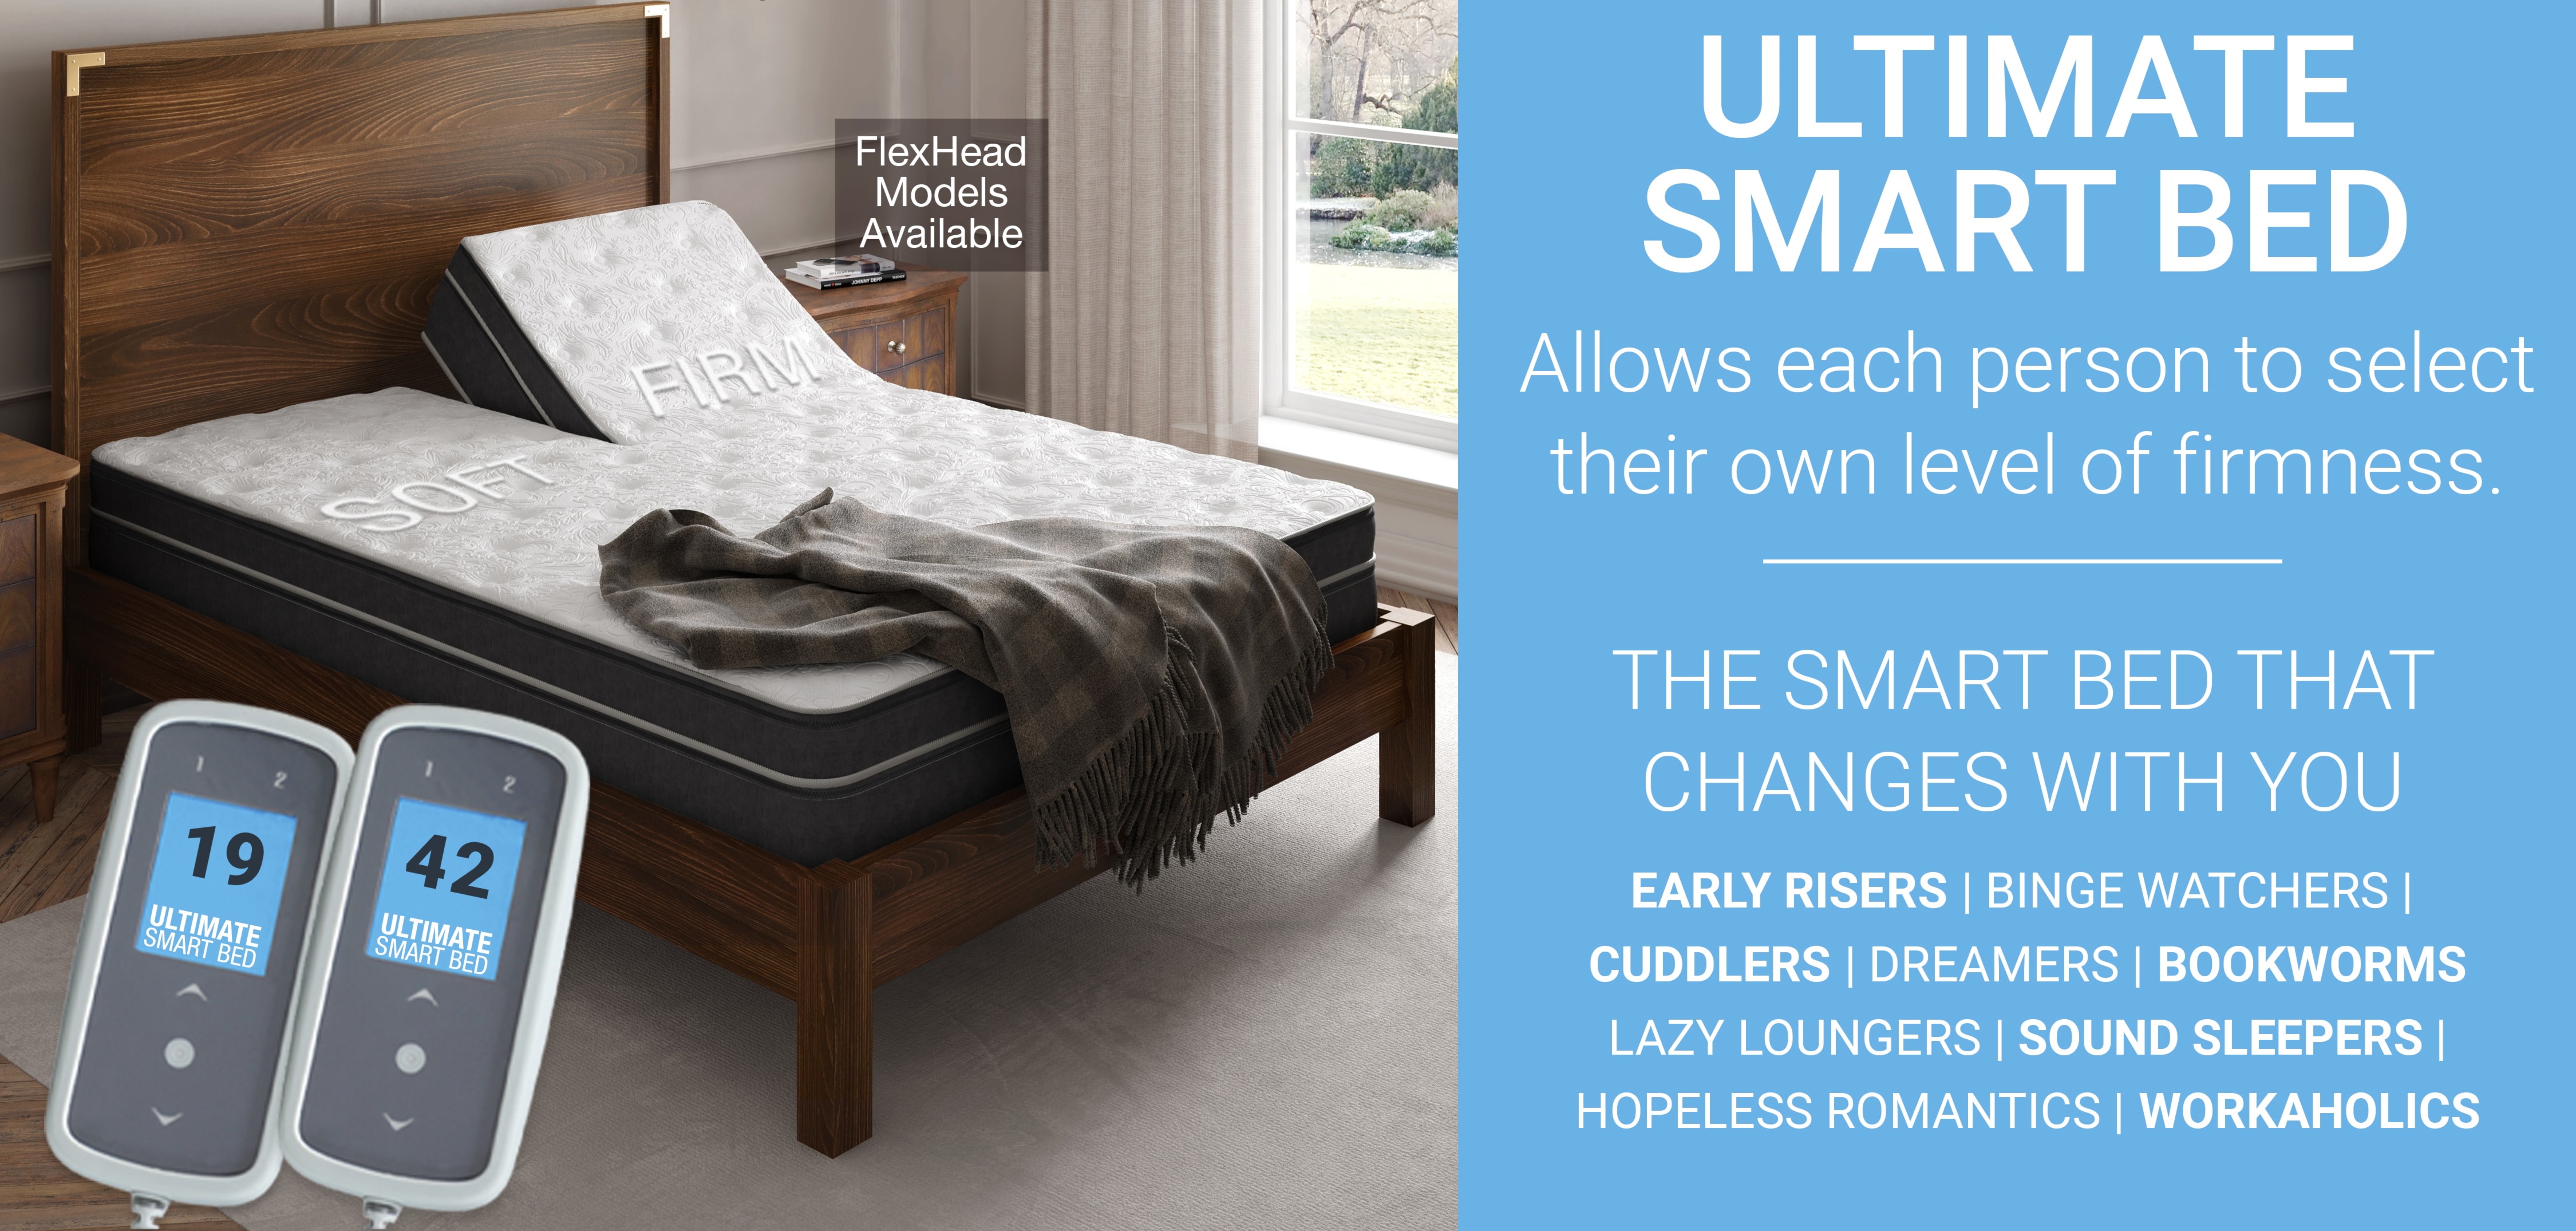 Ultimate Smart Bed | Allows each person to select their own level of firmness. | The smart bed that changes with you.